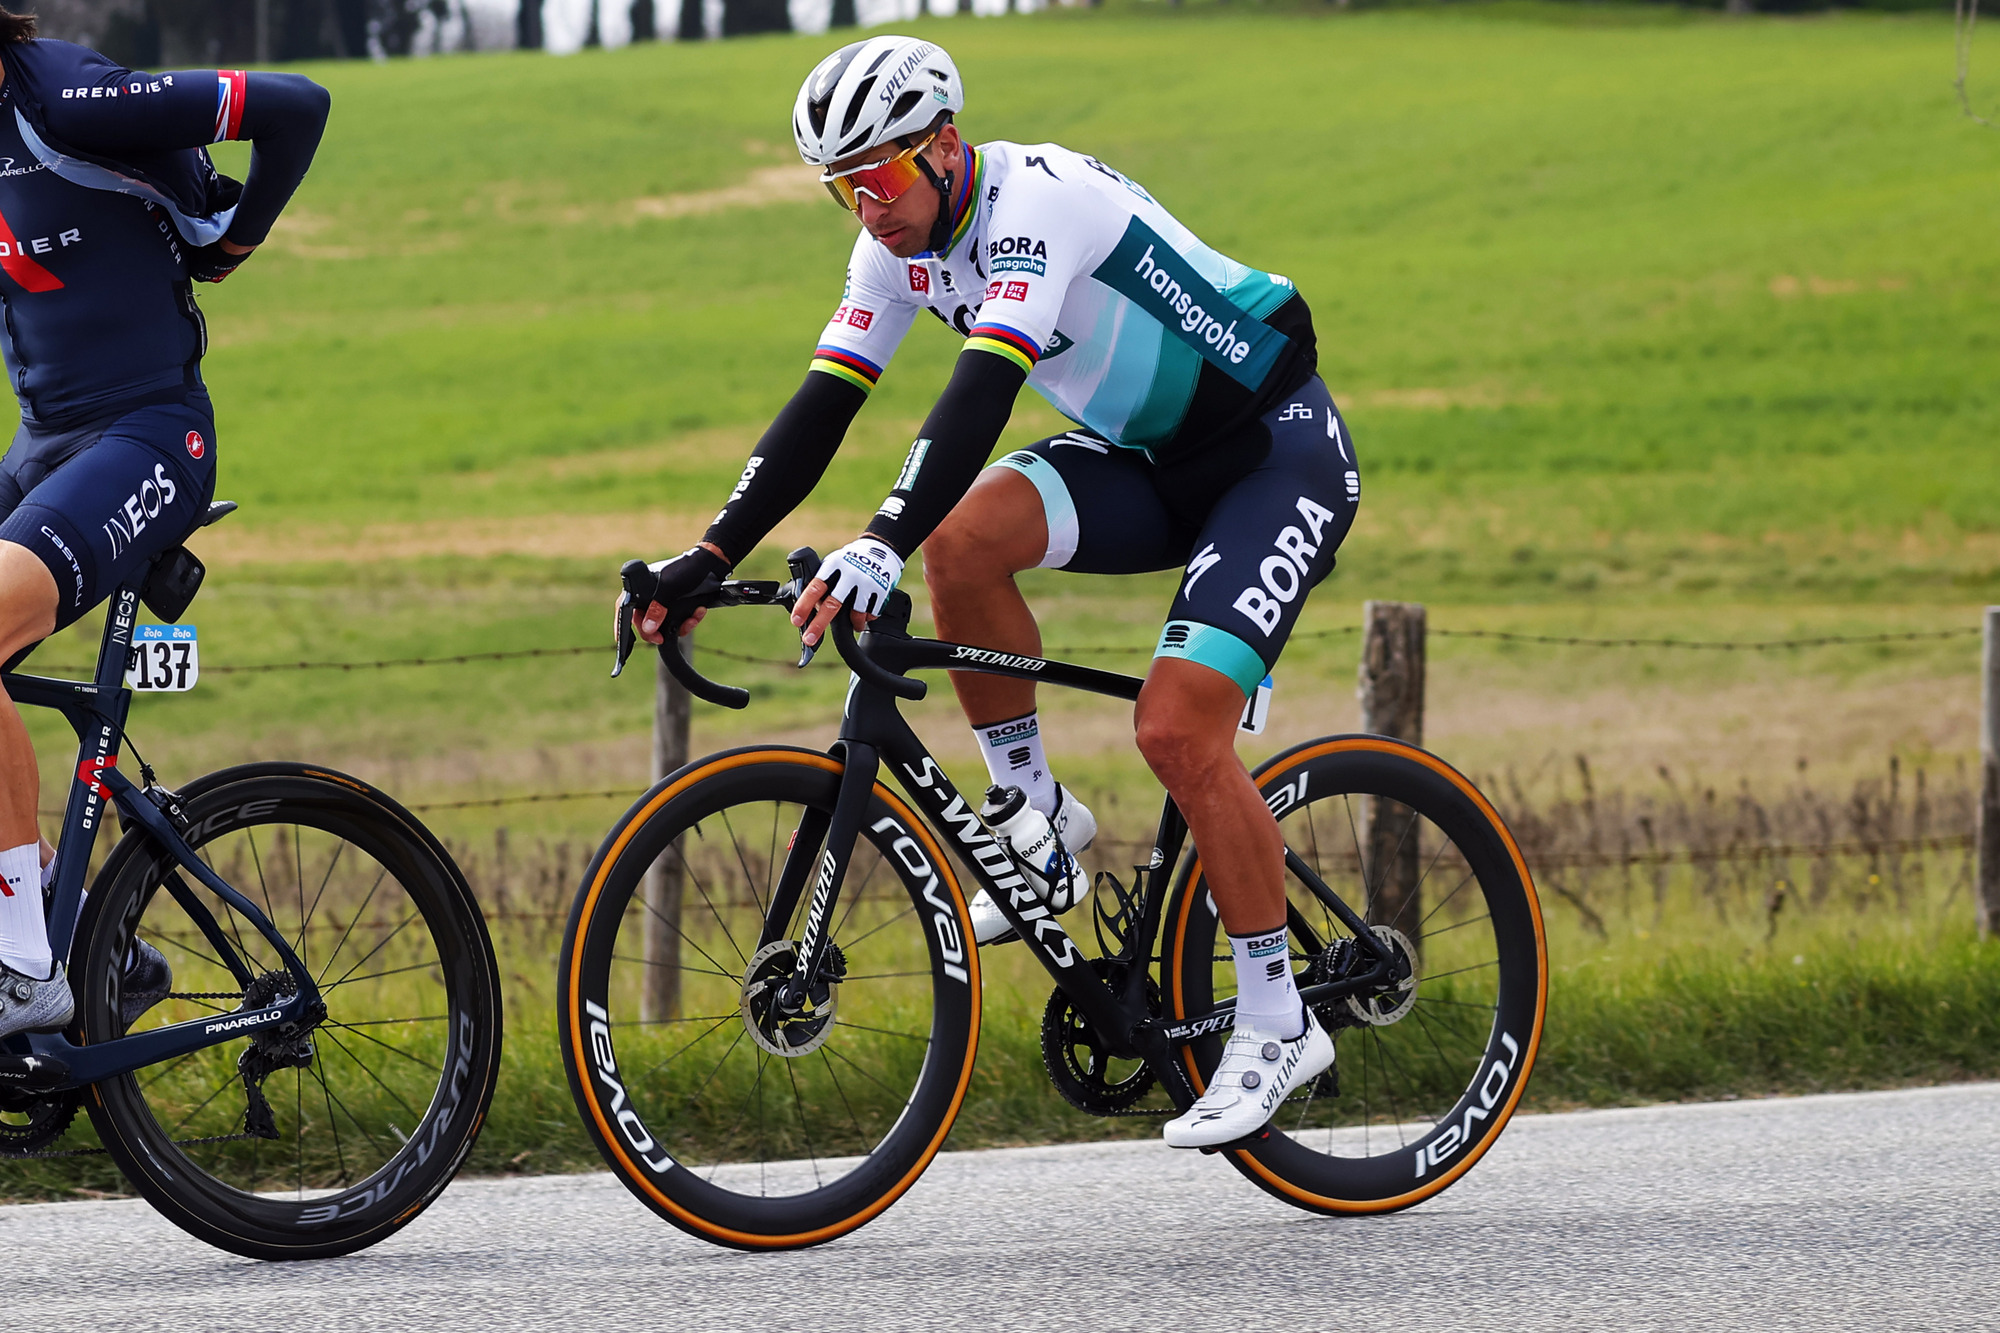 Peter Sagan (Bora-Hansgrohe) suffered on the climb to the finish